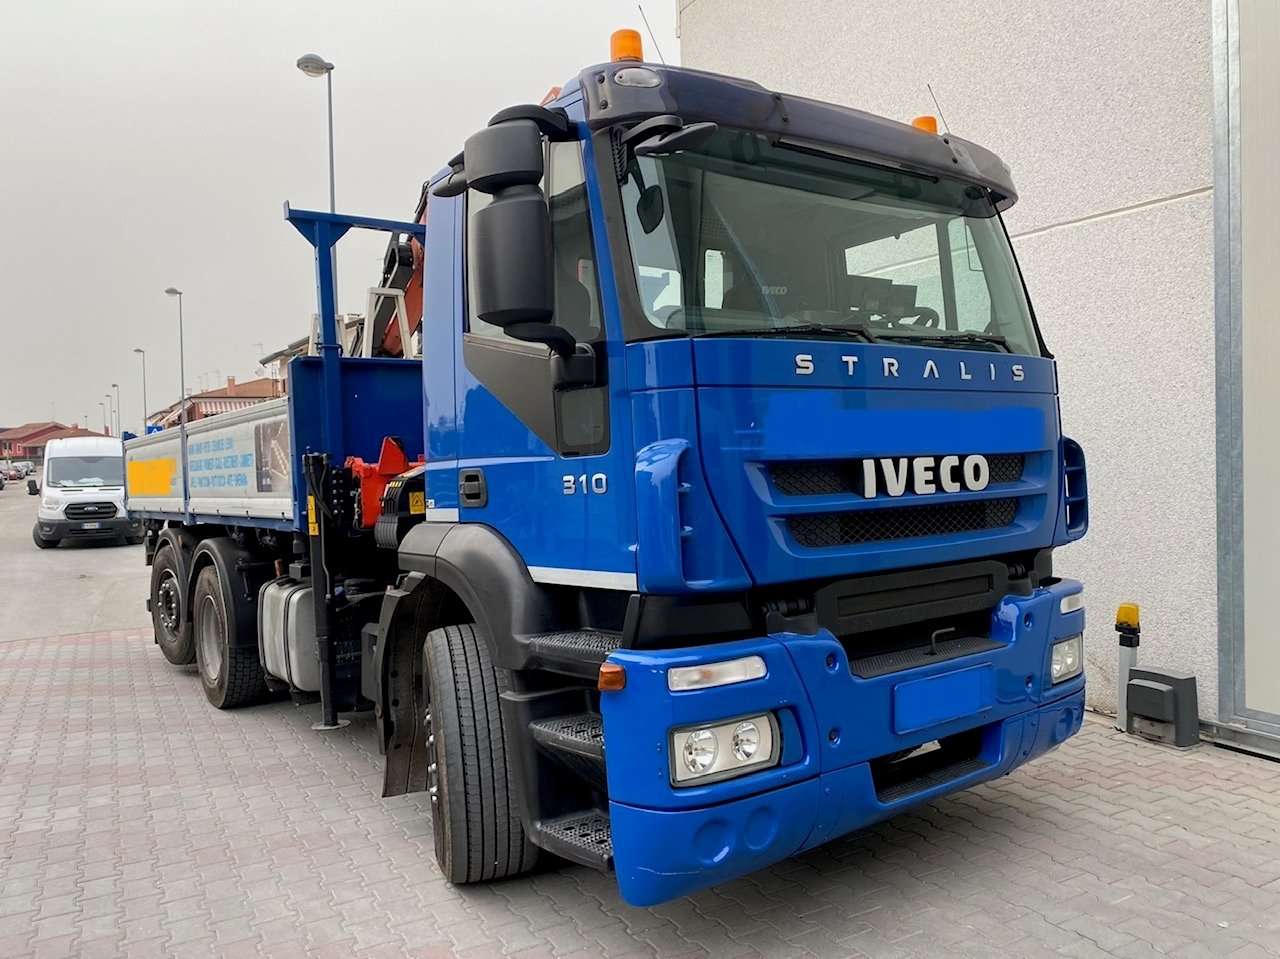 Trucks-Lkw Iveco-Fiat Other in Blue used in Schio - Vi for € 73,000.-